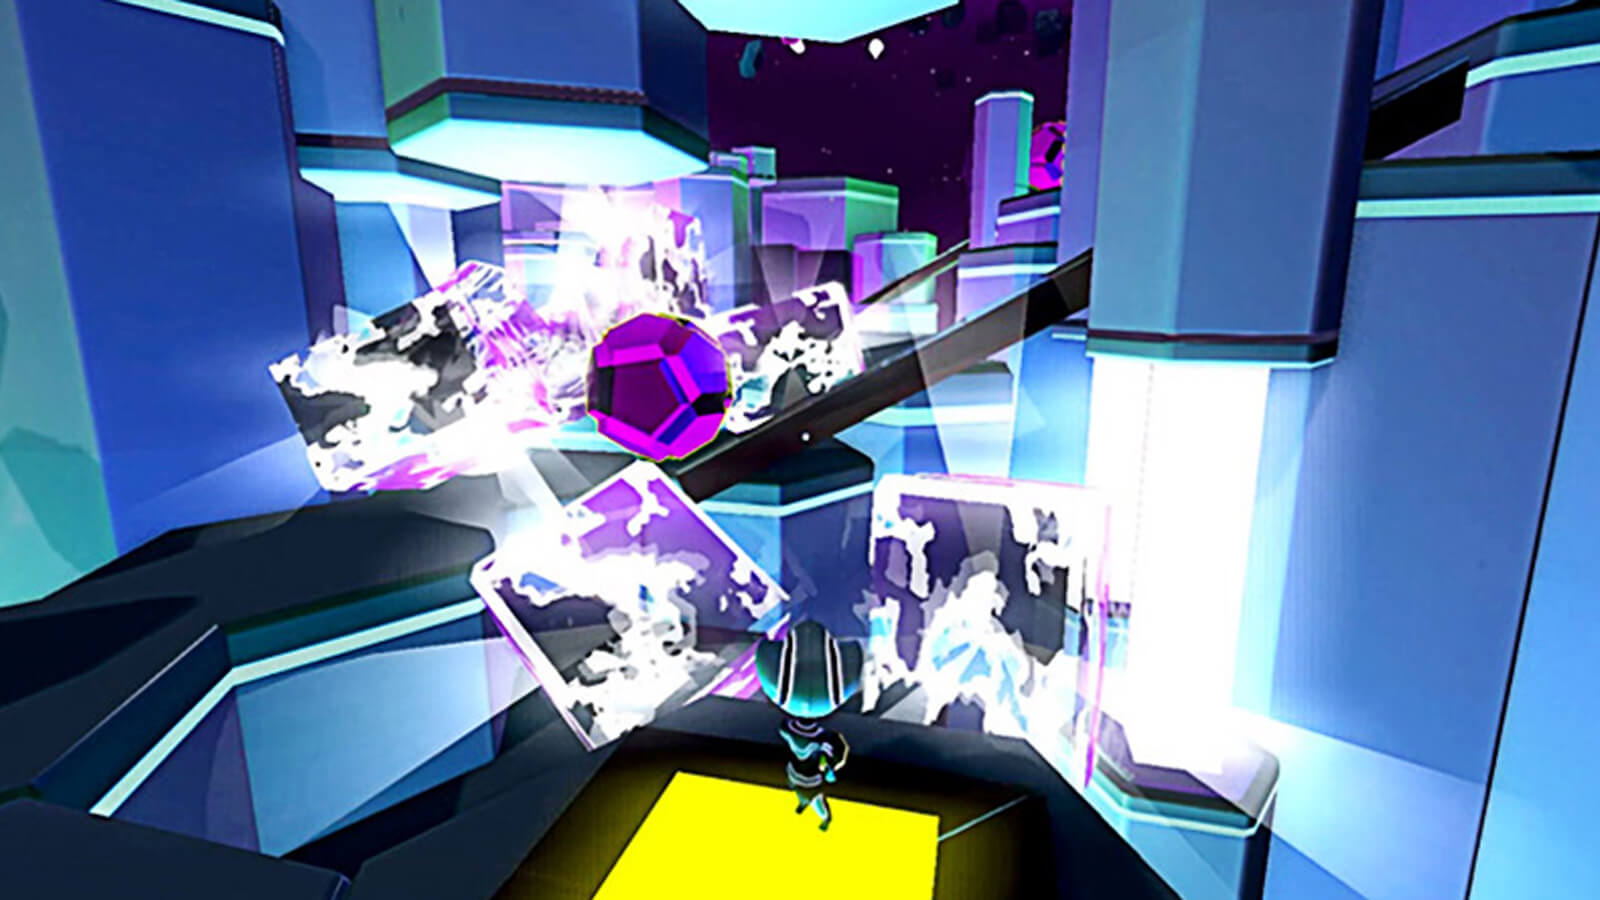 The player's character looks on as a magenta ball rolls down a ramp in front of it